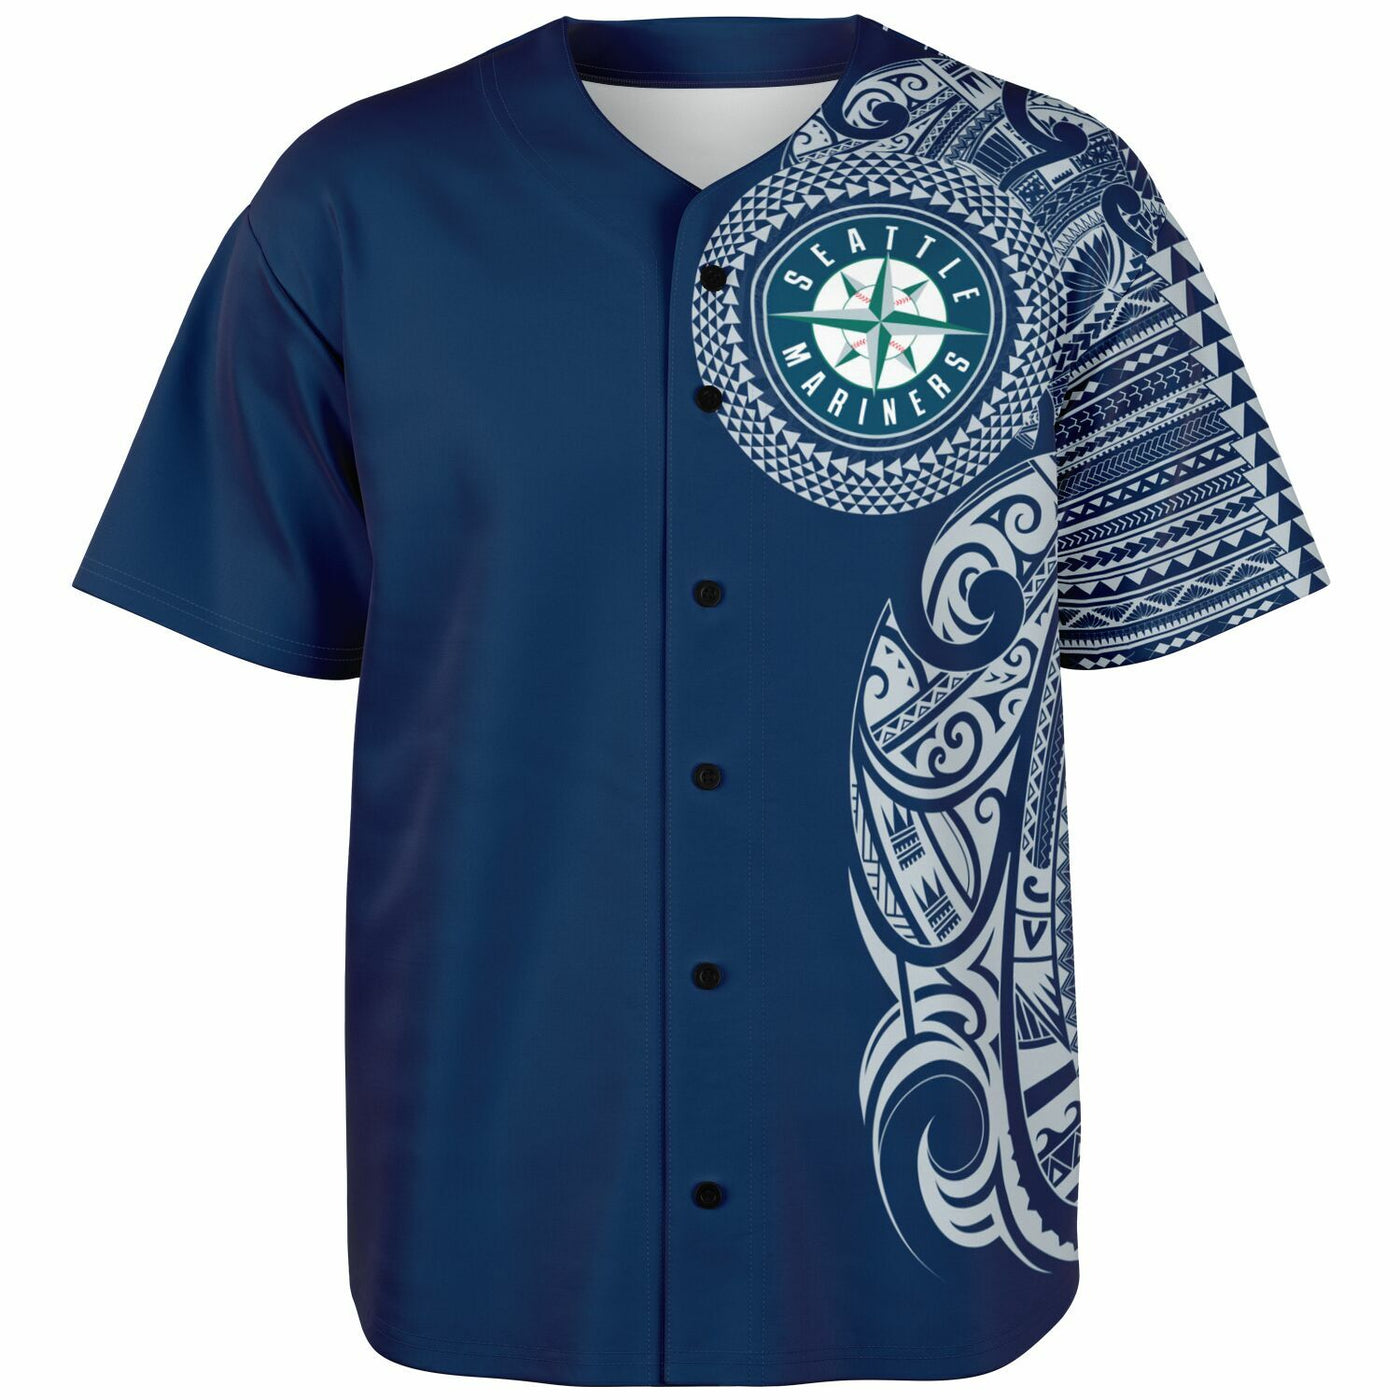 Seattle Mariners Blue MLB Jerseys for sale